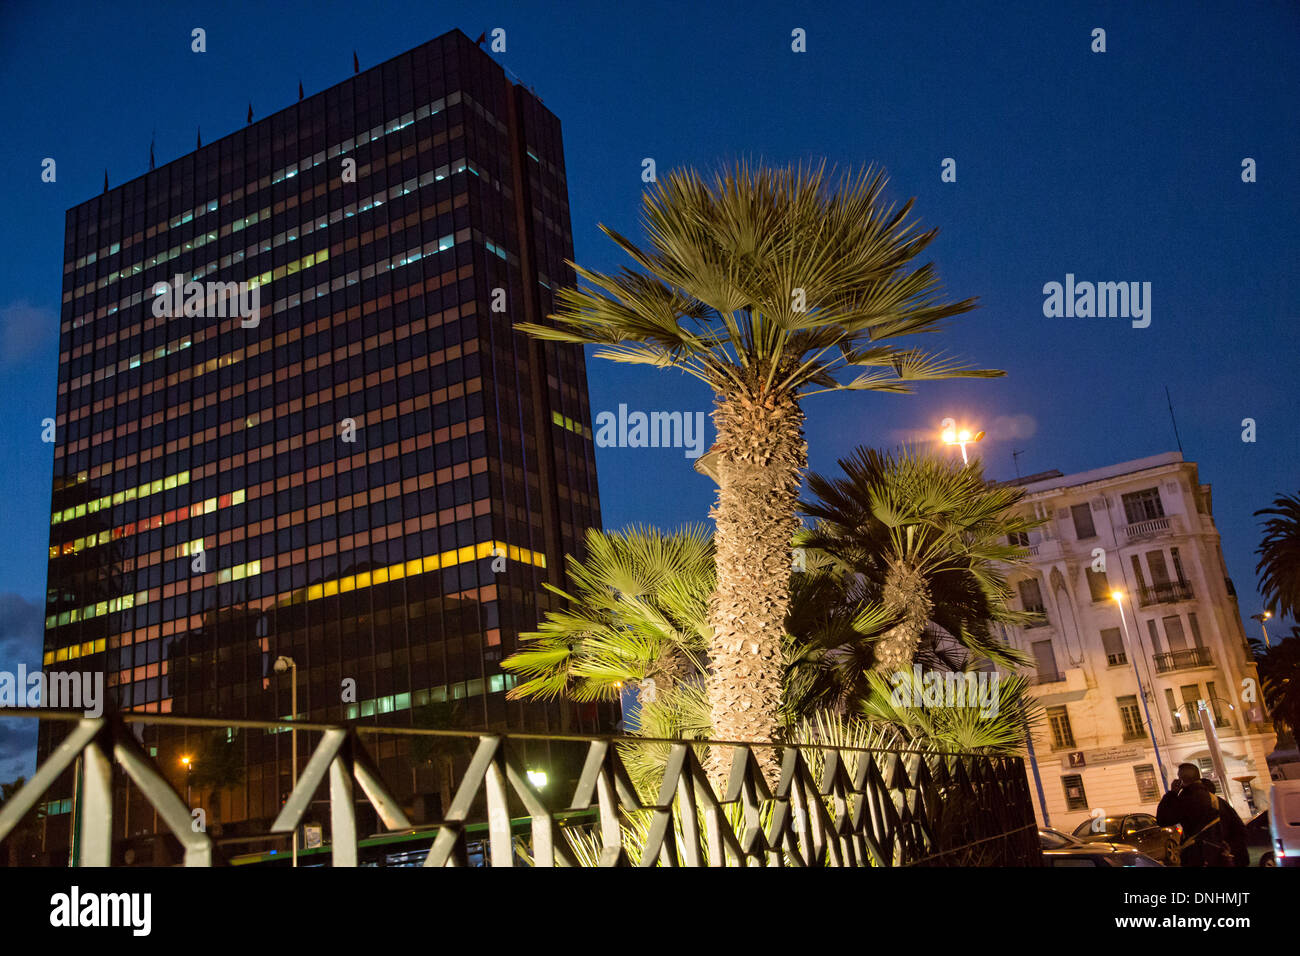 MODERN OFFICE BUILDING, AVENUE OF THE ROYAL ARMY, CASABLANCA, MOROCCO, AFRICA Stock Photo